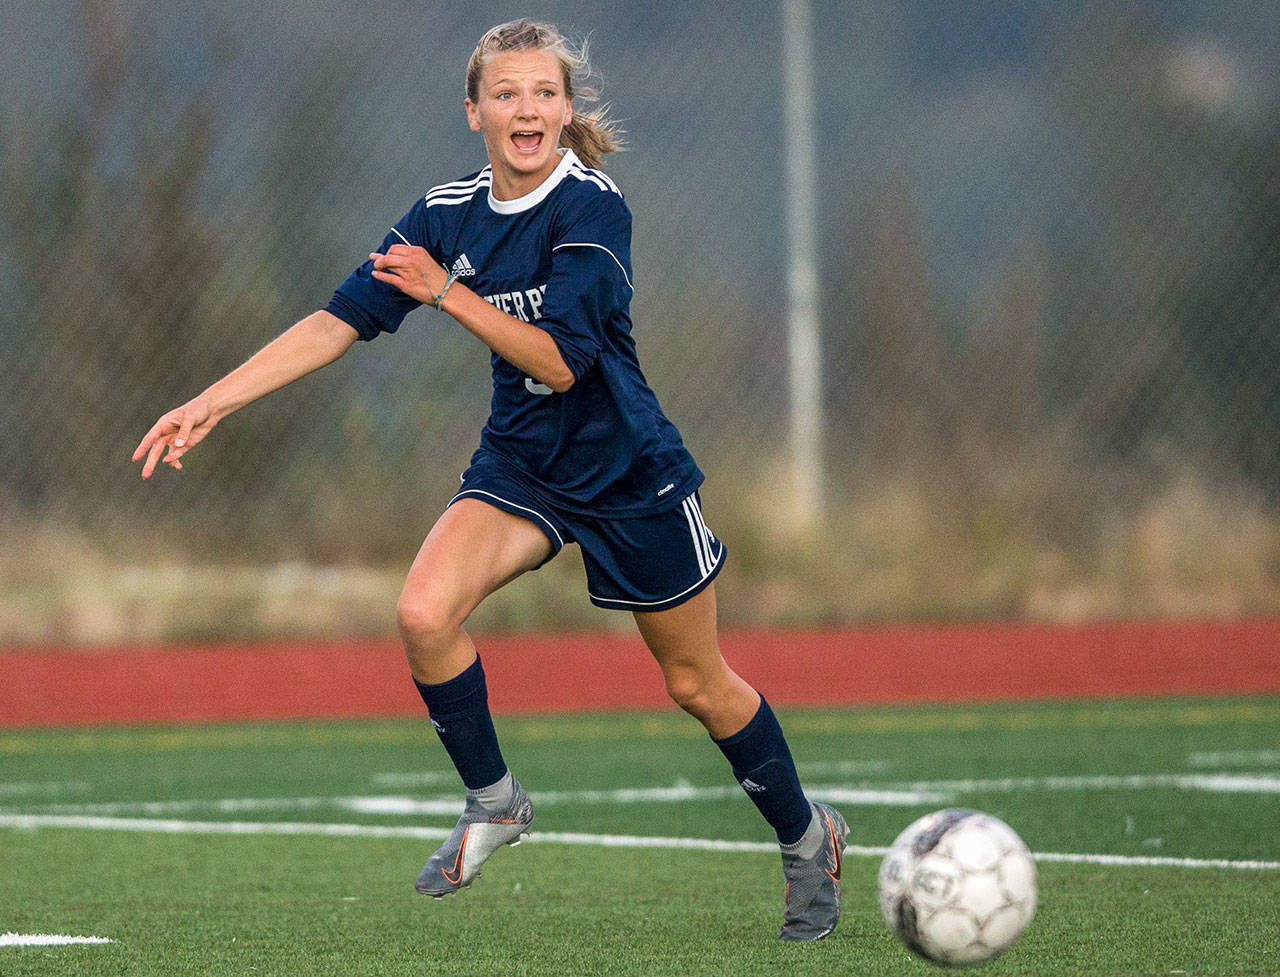 Chloe Seelhoff is one of three former Development Academy players who are able to play for Glacier Peak this season because of a change in their club program’s league affiliation. (Olivia Vanni / The Herald)